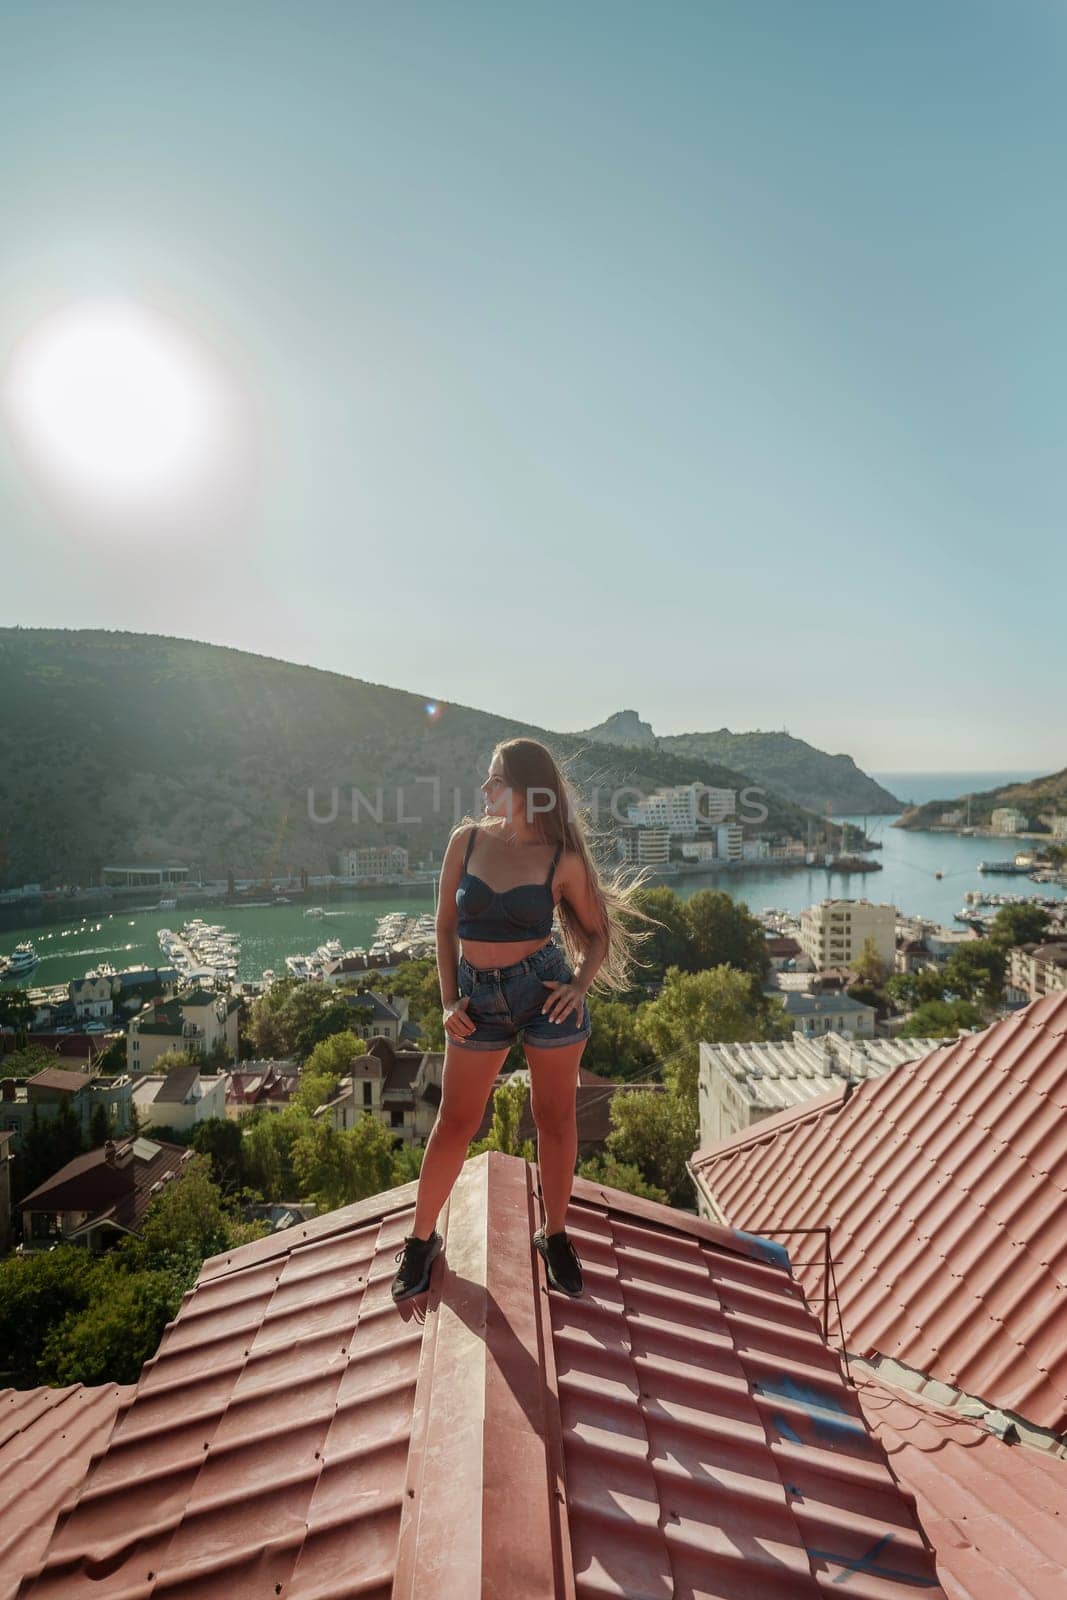 Woman standing on rooftop, enjoys town view and sea mountains. Peaceful rooftop relaxation. Below her, there is a town with several boats visible in the water. Rooftop vantage point. by Matiunina